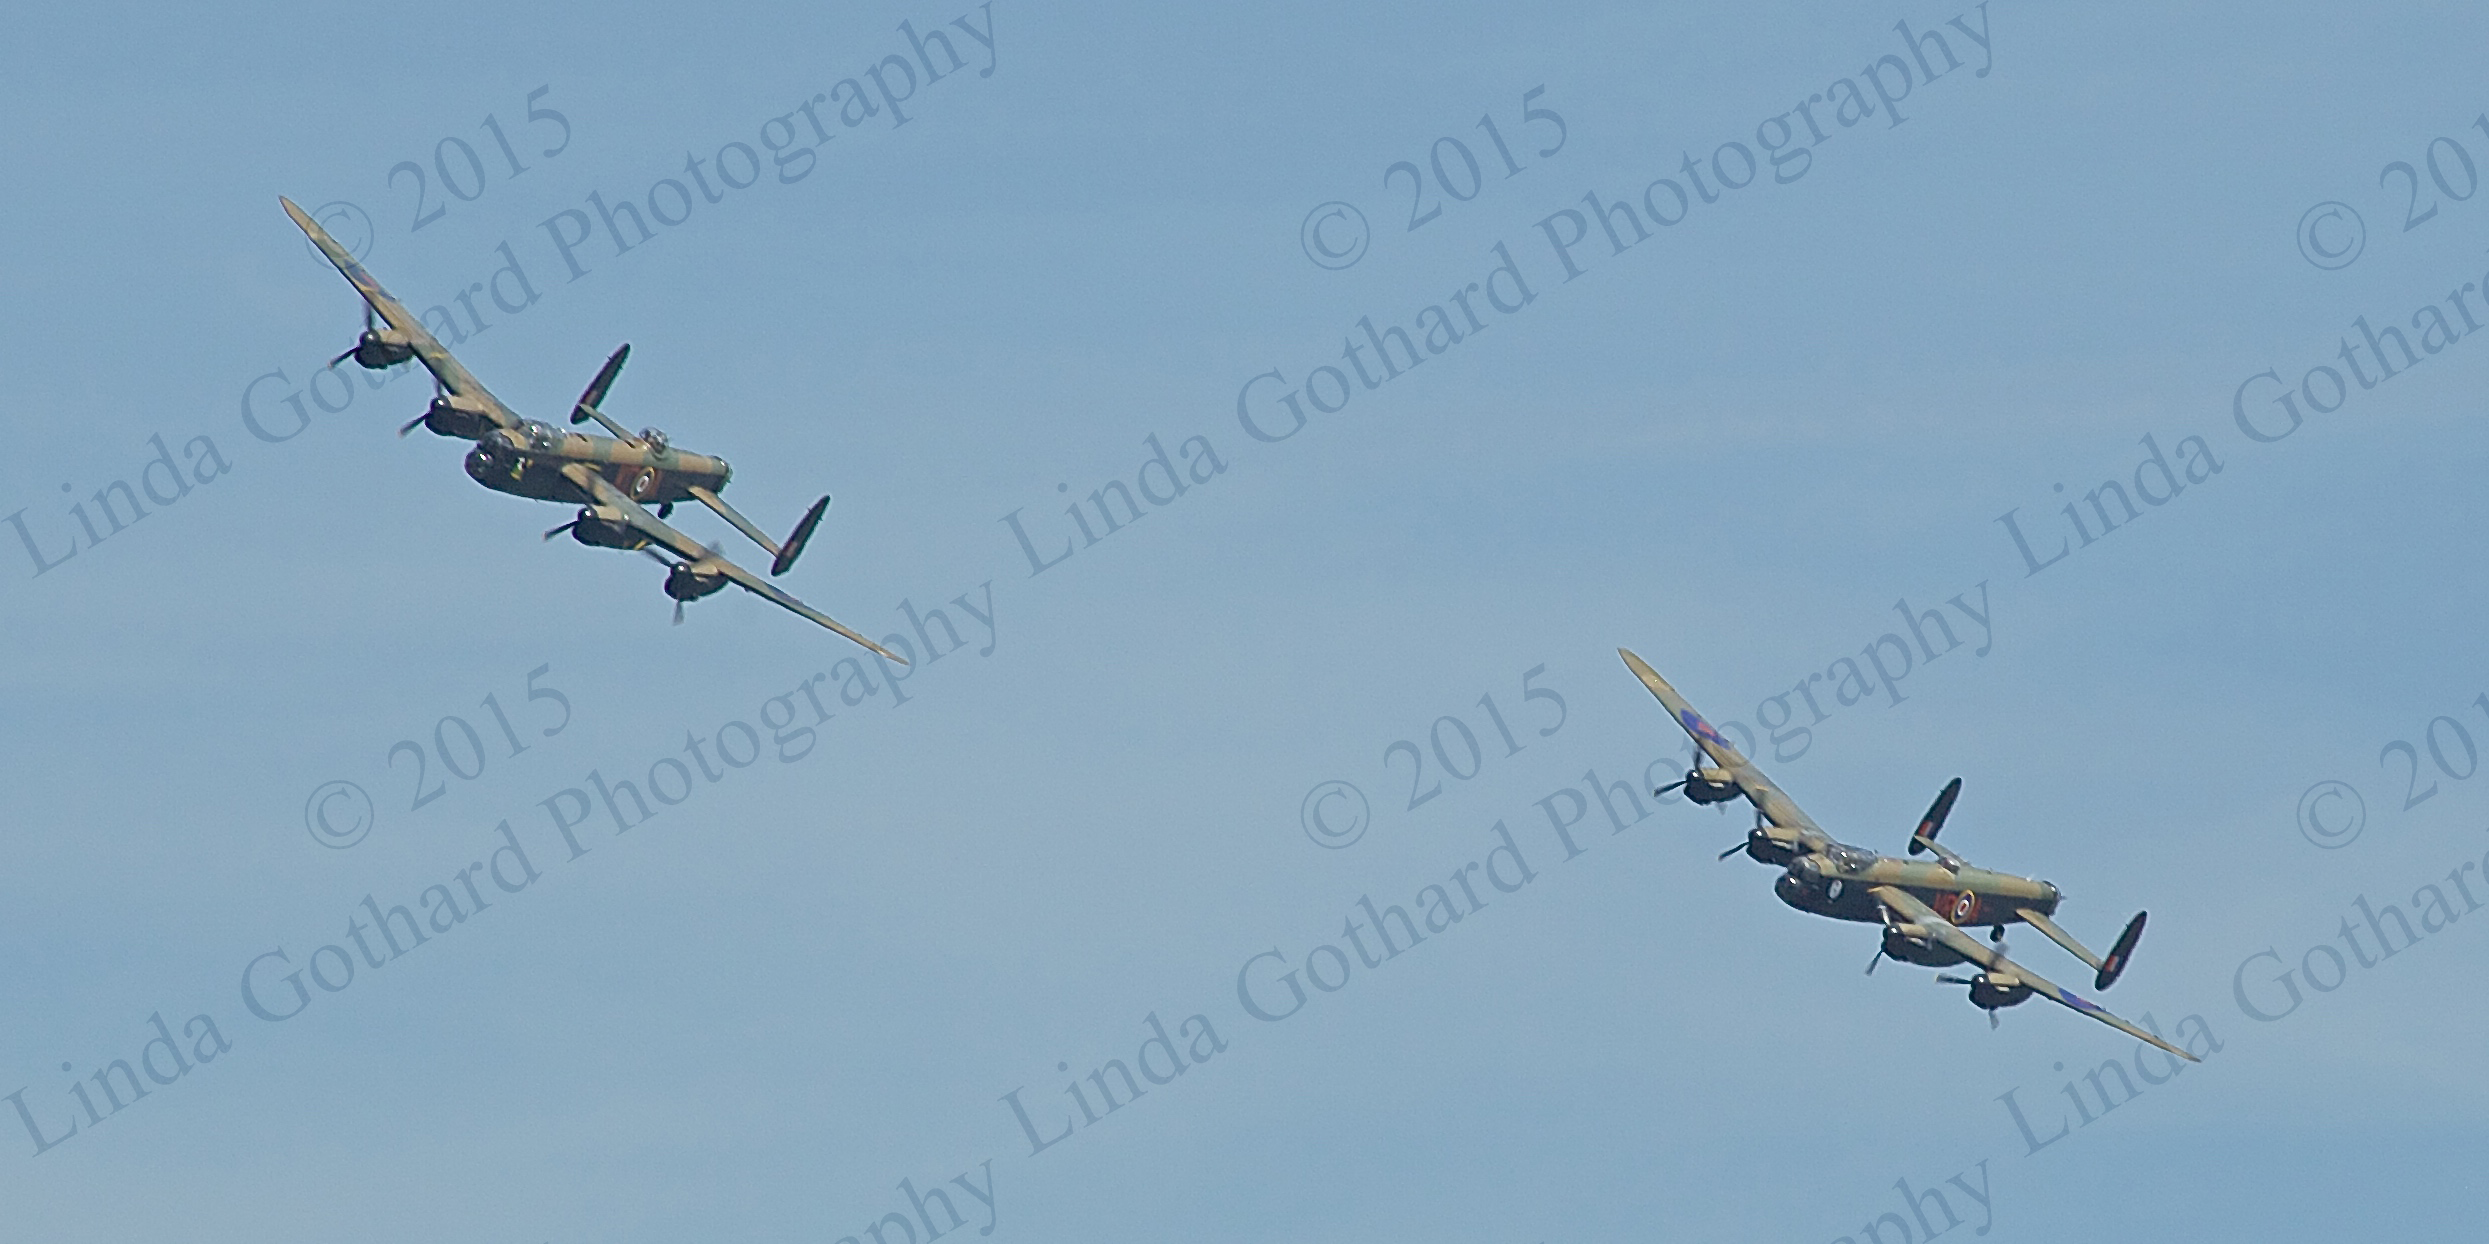 Last two remaining Lancaster Bombers